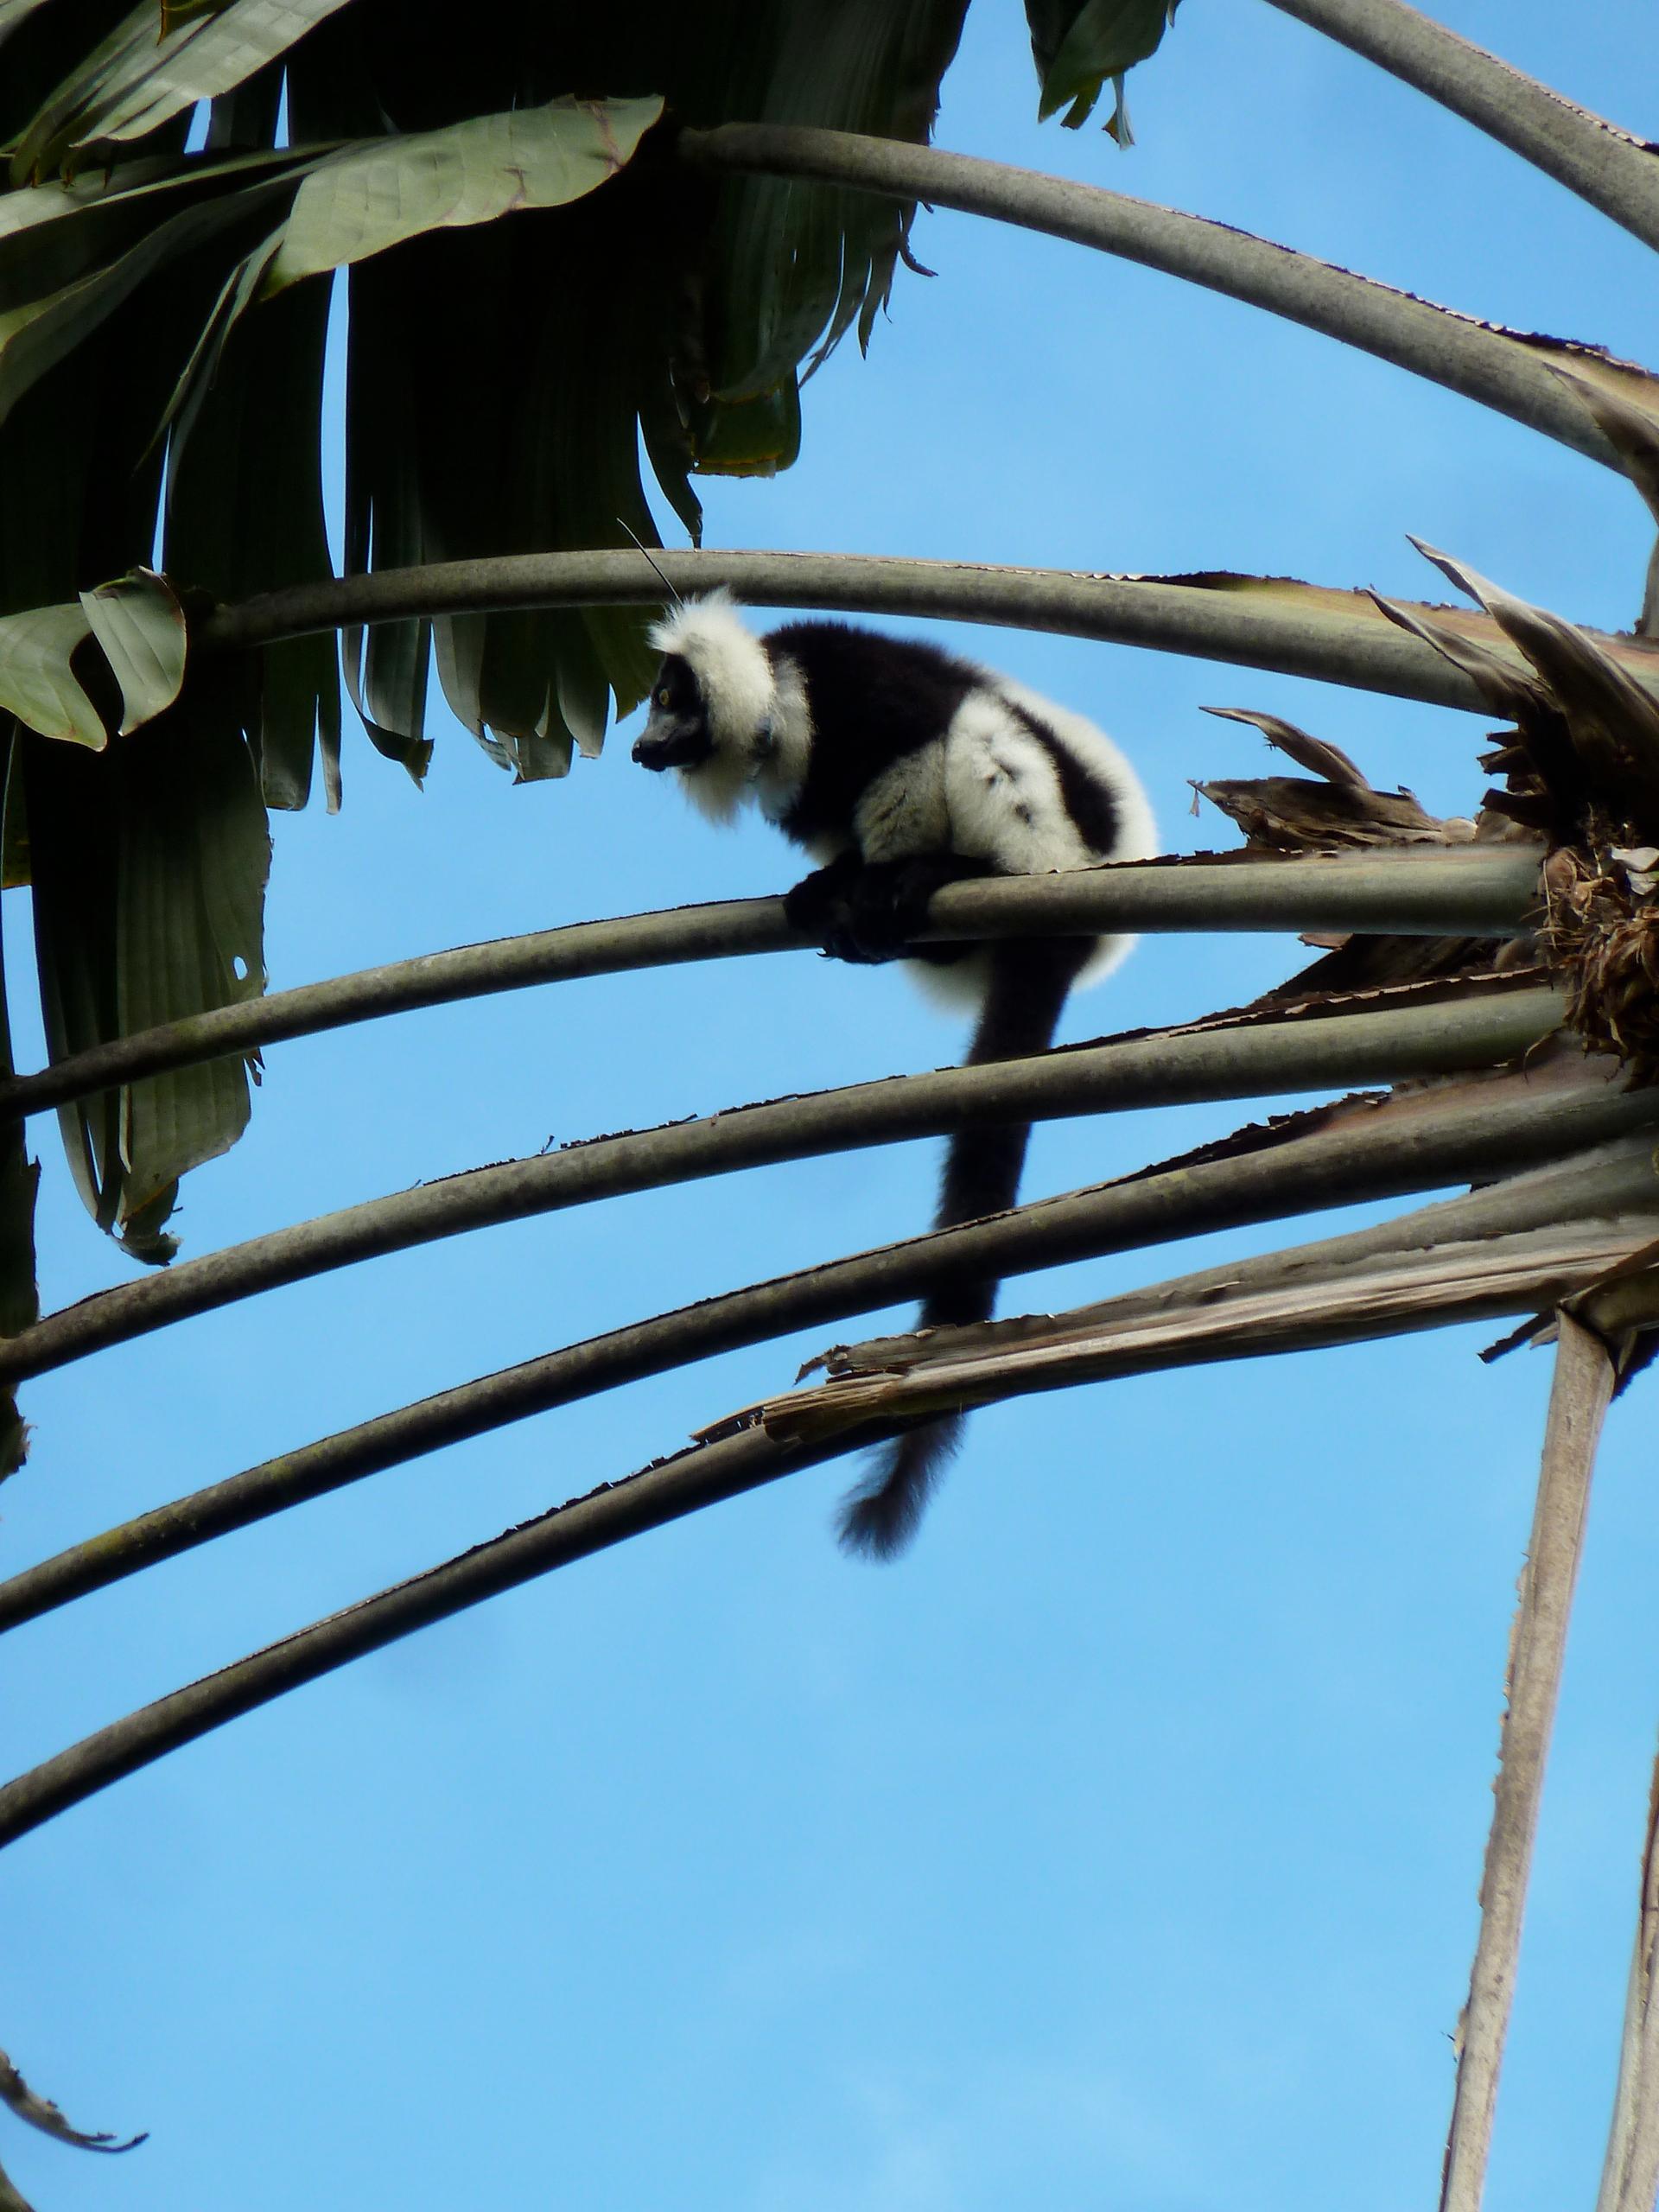 A black and white lemur looms in a tree above the village of Kianjavato, in southern Madagascar. Many lemur species are now critically endangered due to widespread deforestation. But their poop often holds the key to reforesting parts of the island.